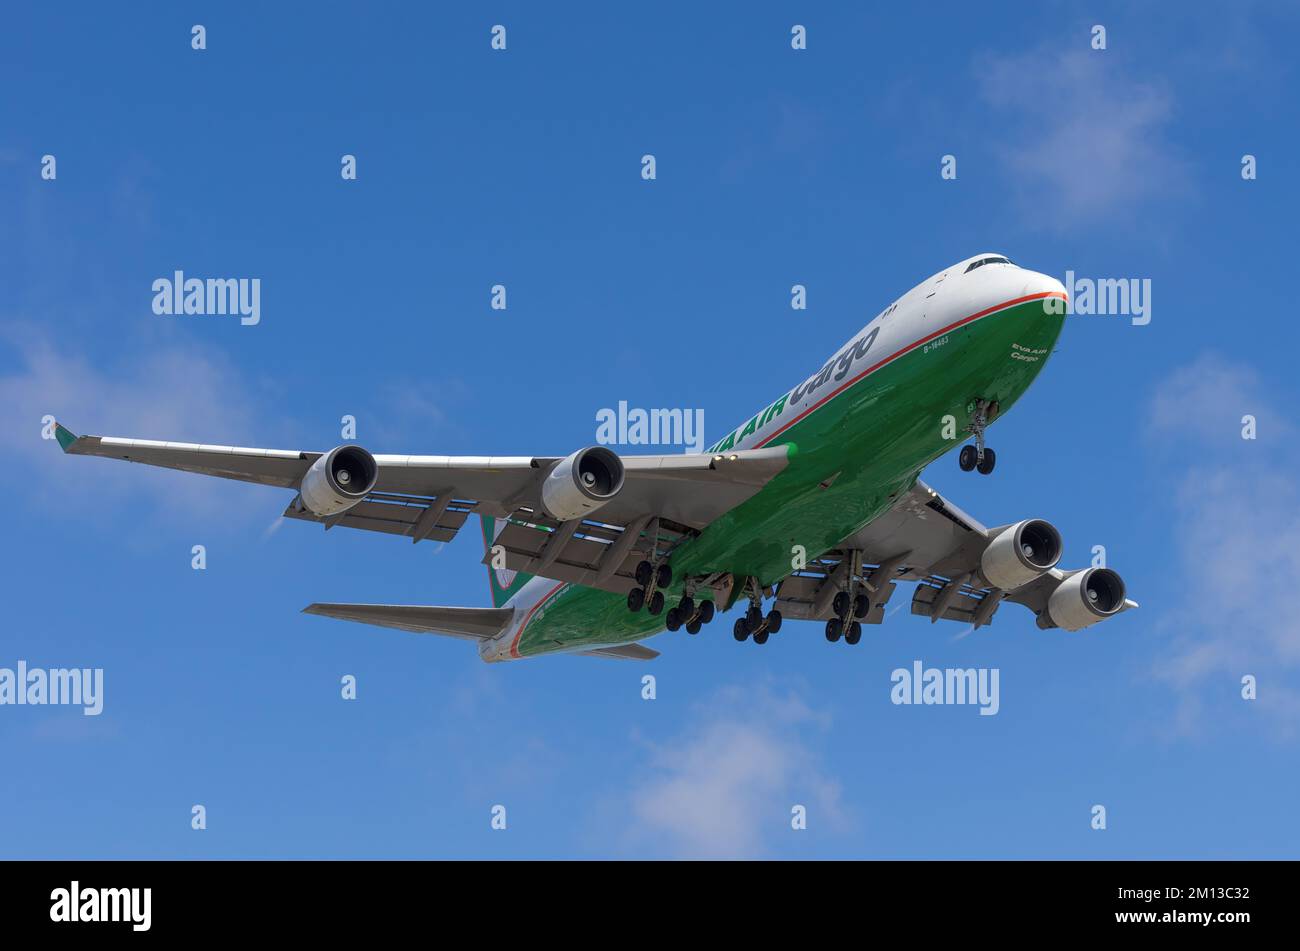 Los Angeles, California, United States - June 5, 2015: EVA Air Cargo Boeing 747-400 shown about to land at LAX, Los Angeles International Airport. Stock Photo